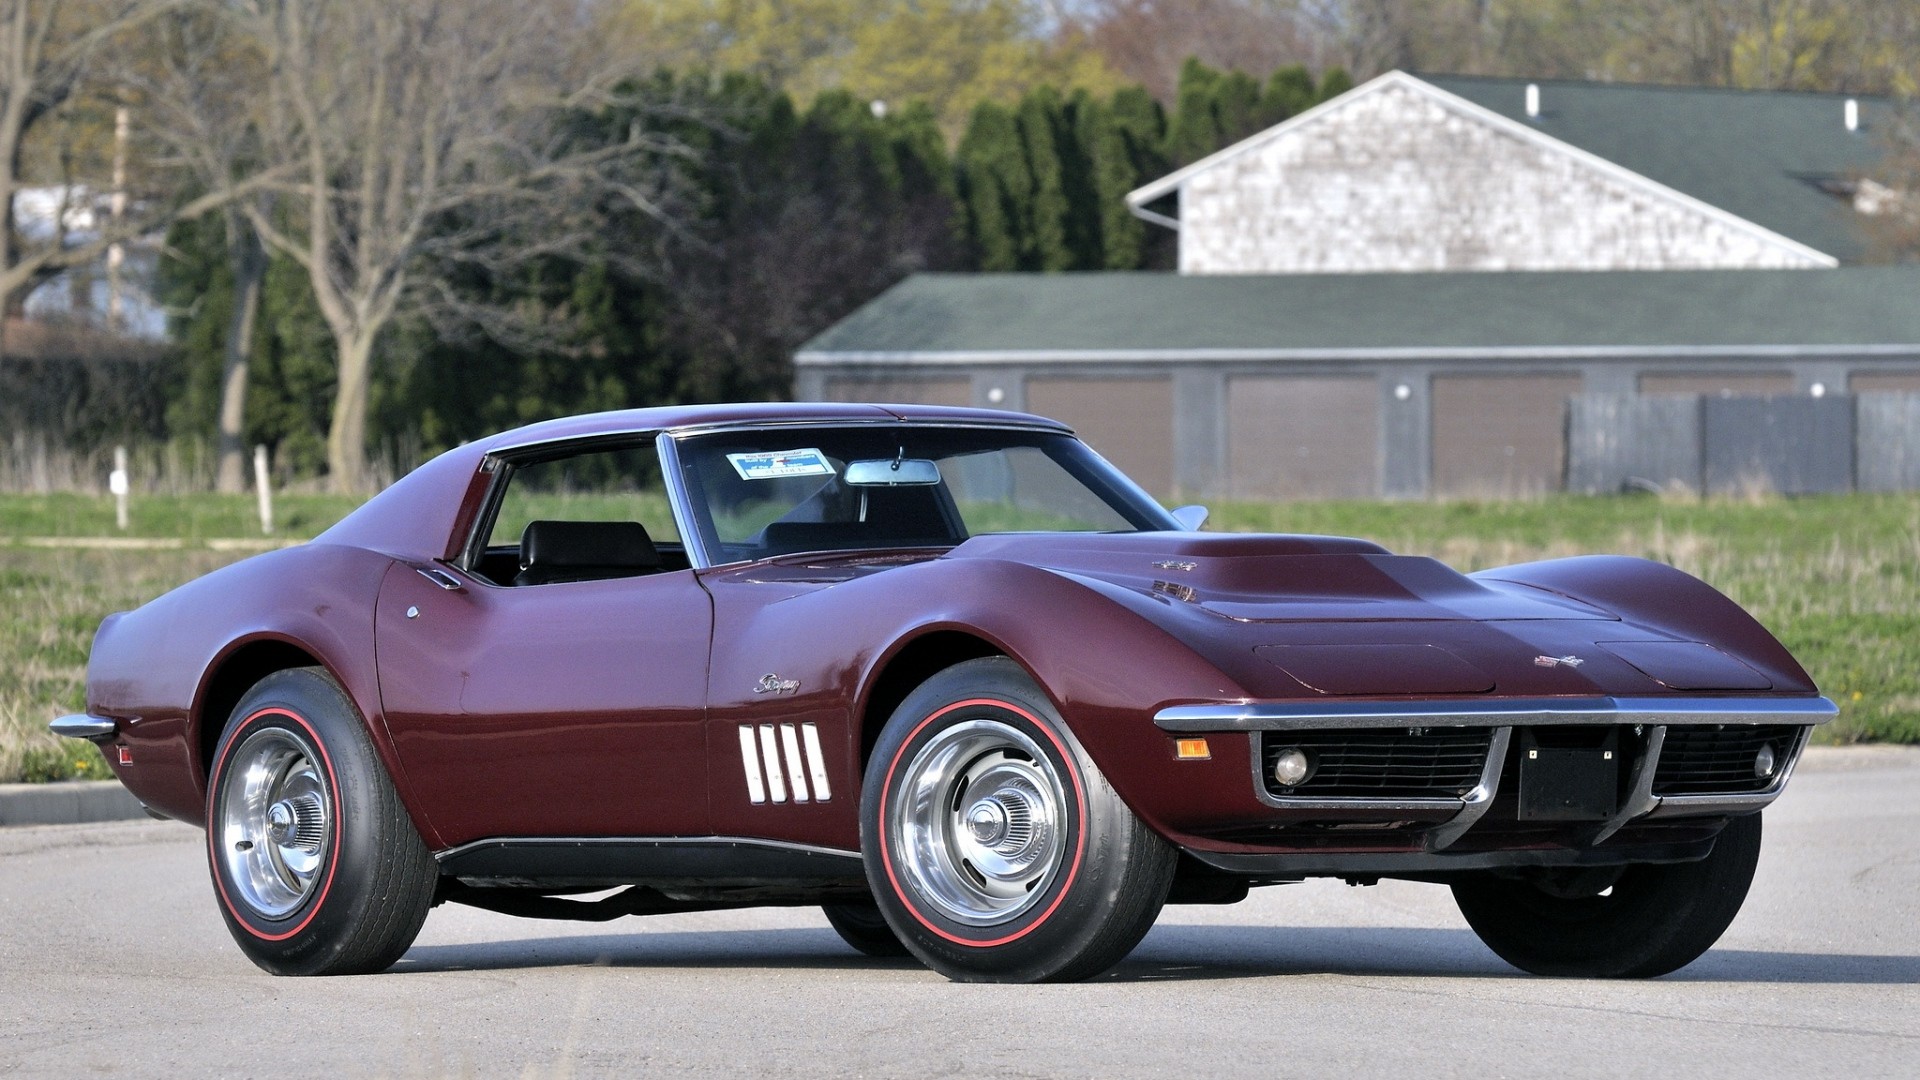 1920x1080 Download now full hd wallpaper chevrolet corvette stingray muscle car side  view coupe street vancouver ...